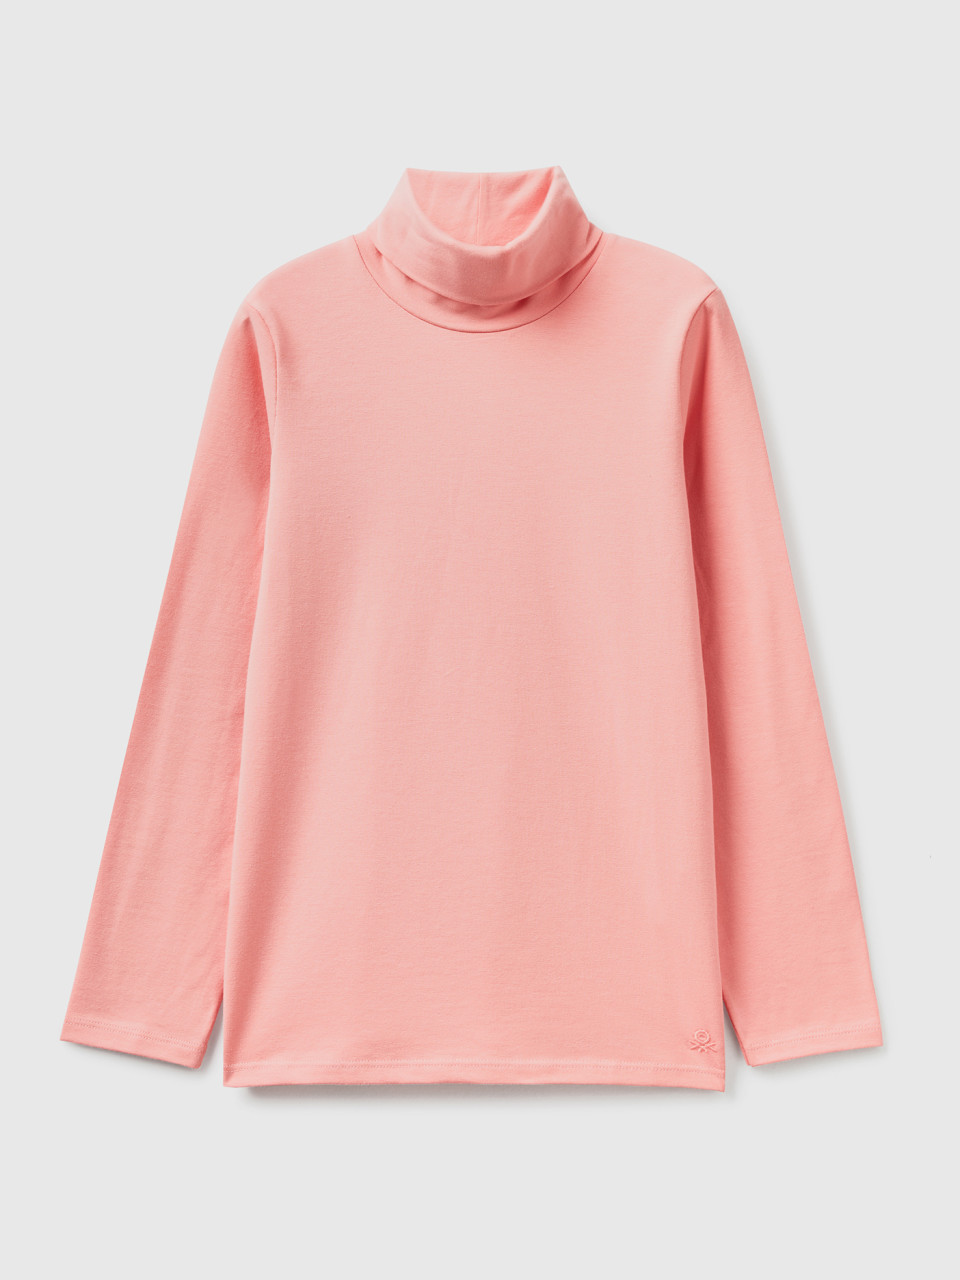 Benetton, Stretch T-shirt With High Neck, Pink, Kids